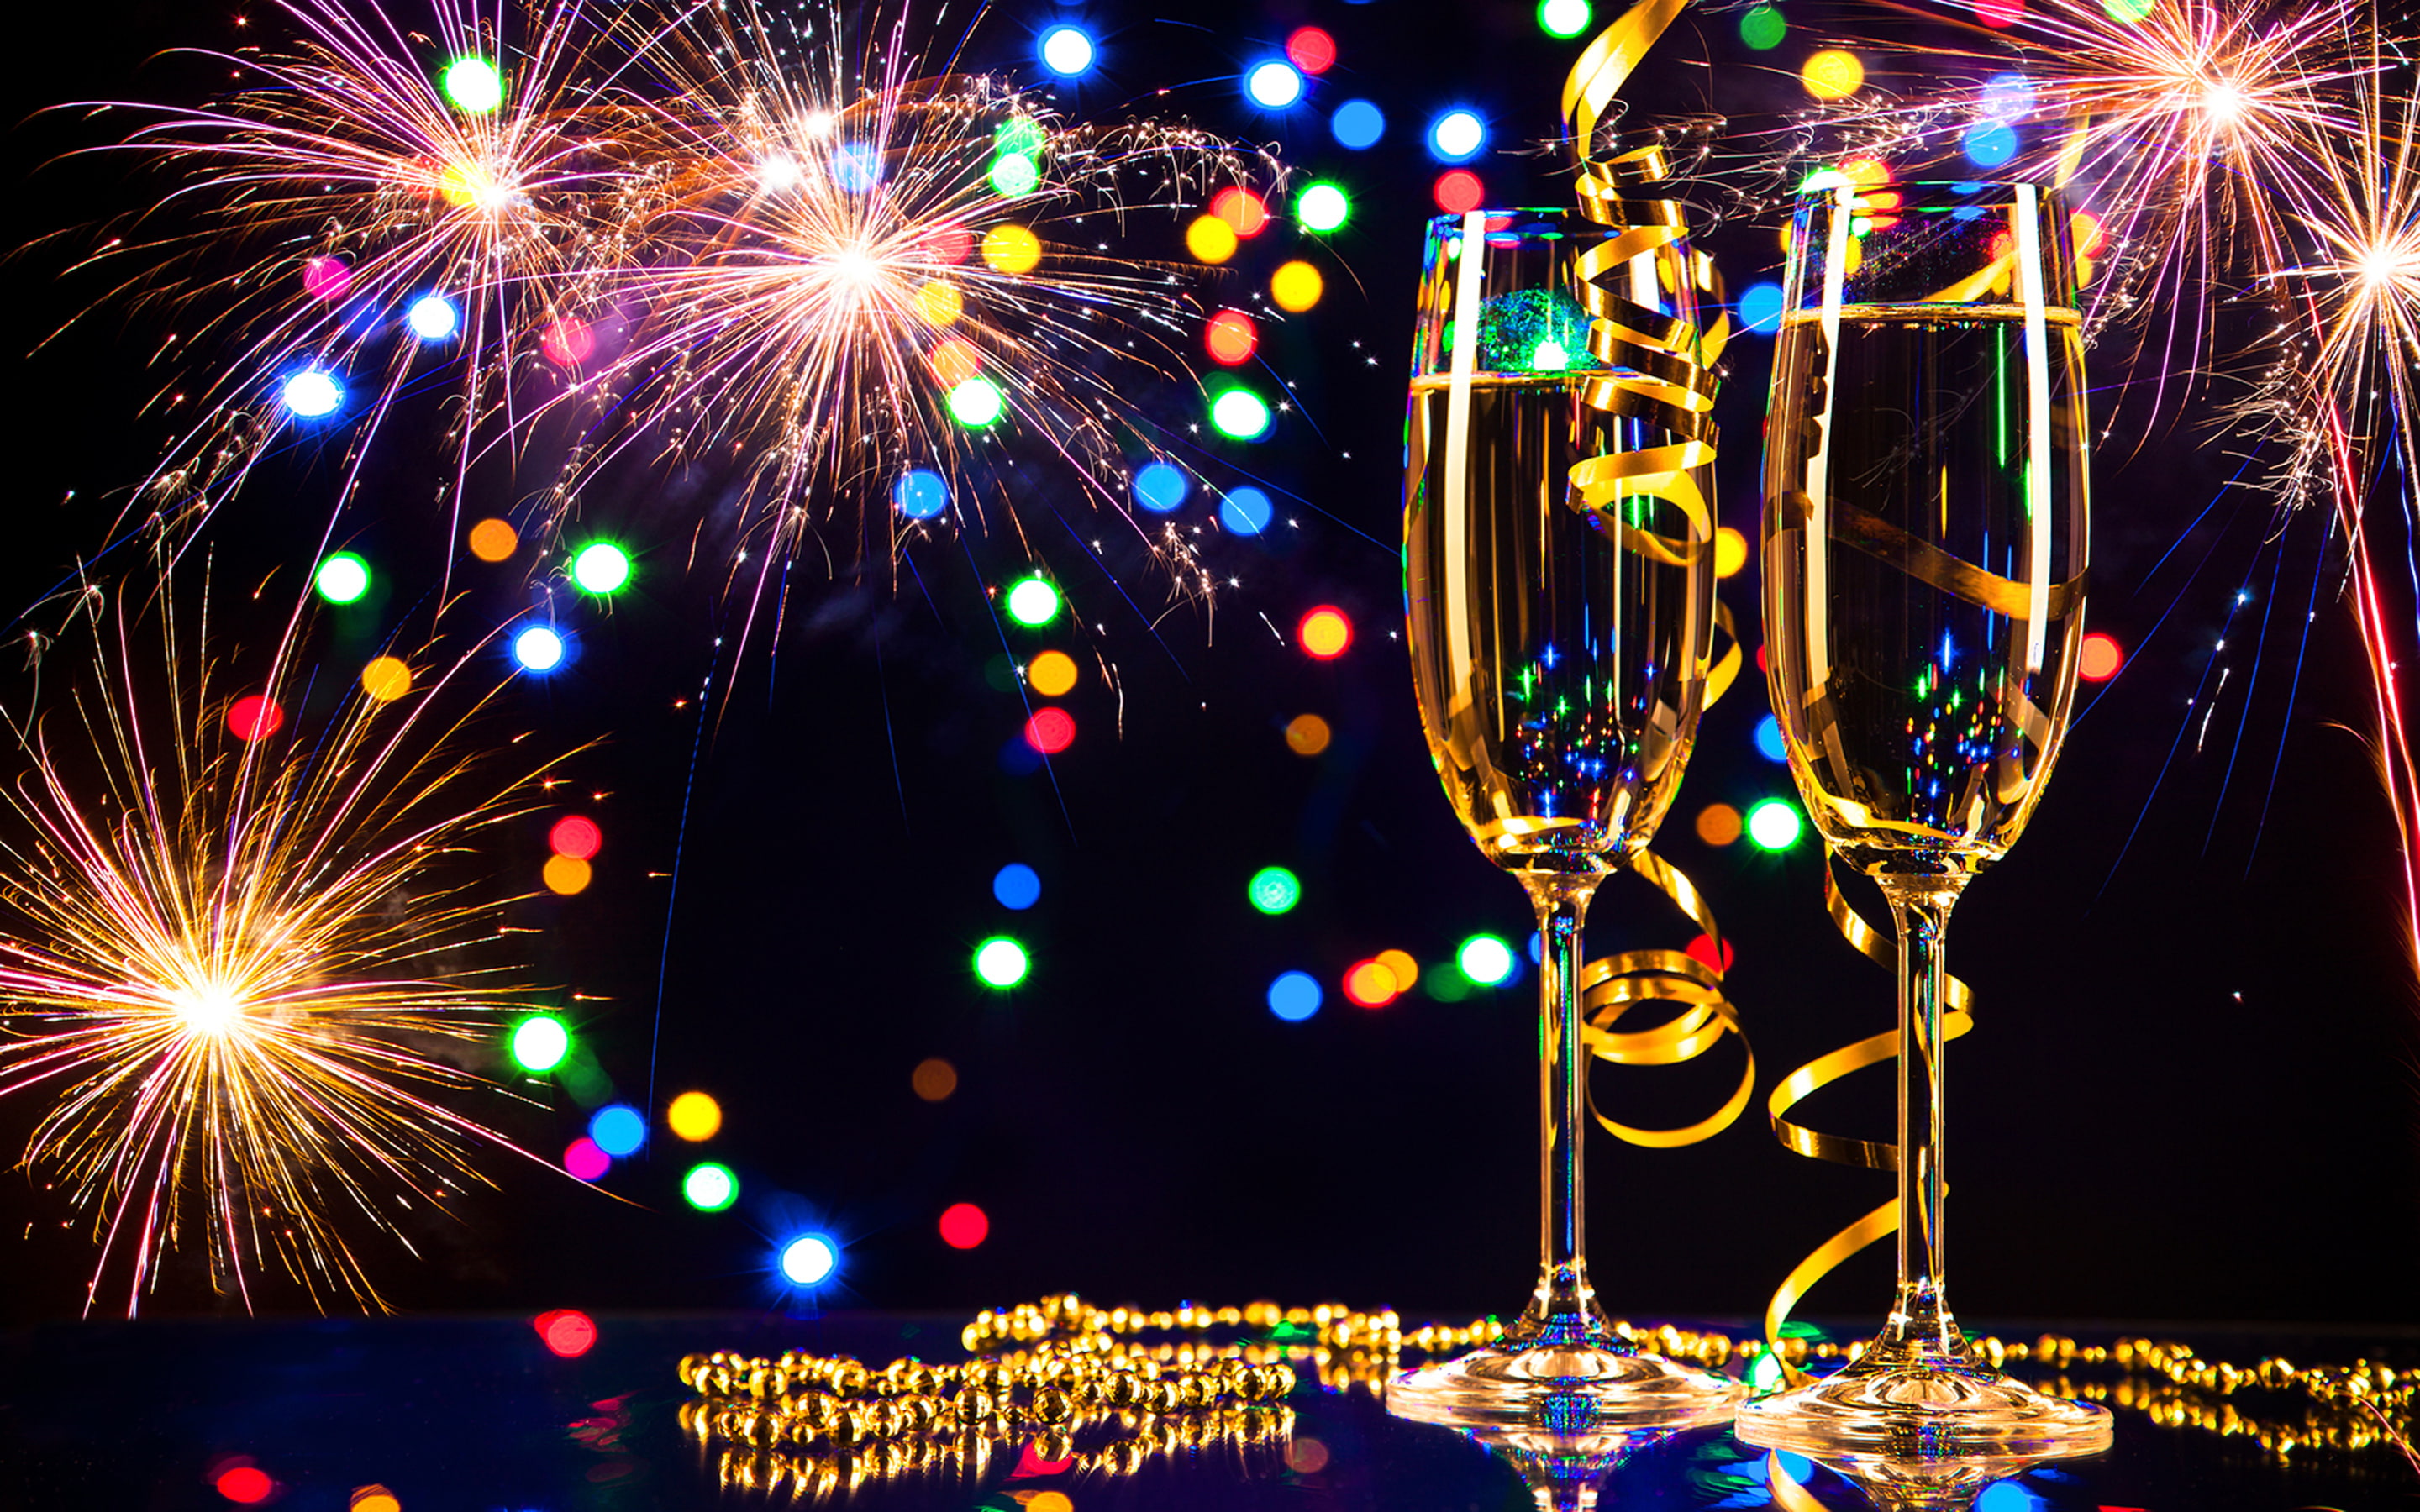 Happy New Year 2019 Glasses Of Champagne And Fireworks Desktop Wallpaper Hd For Mobile Phones And Laptops 2880×1800